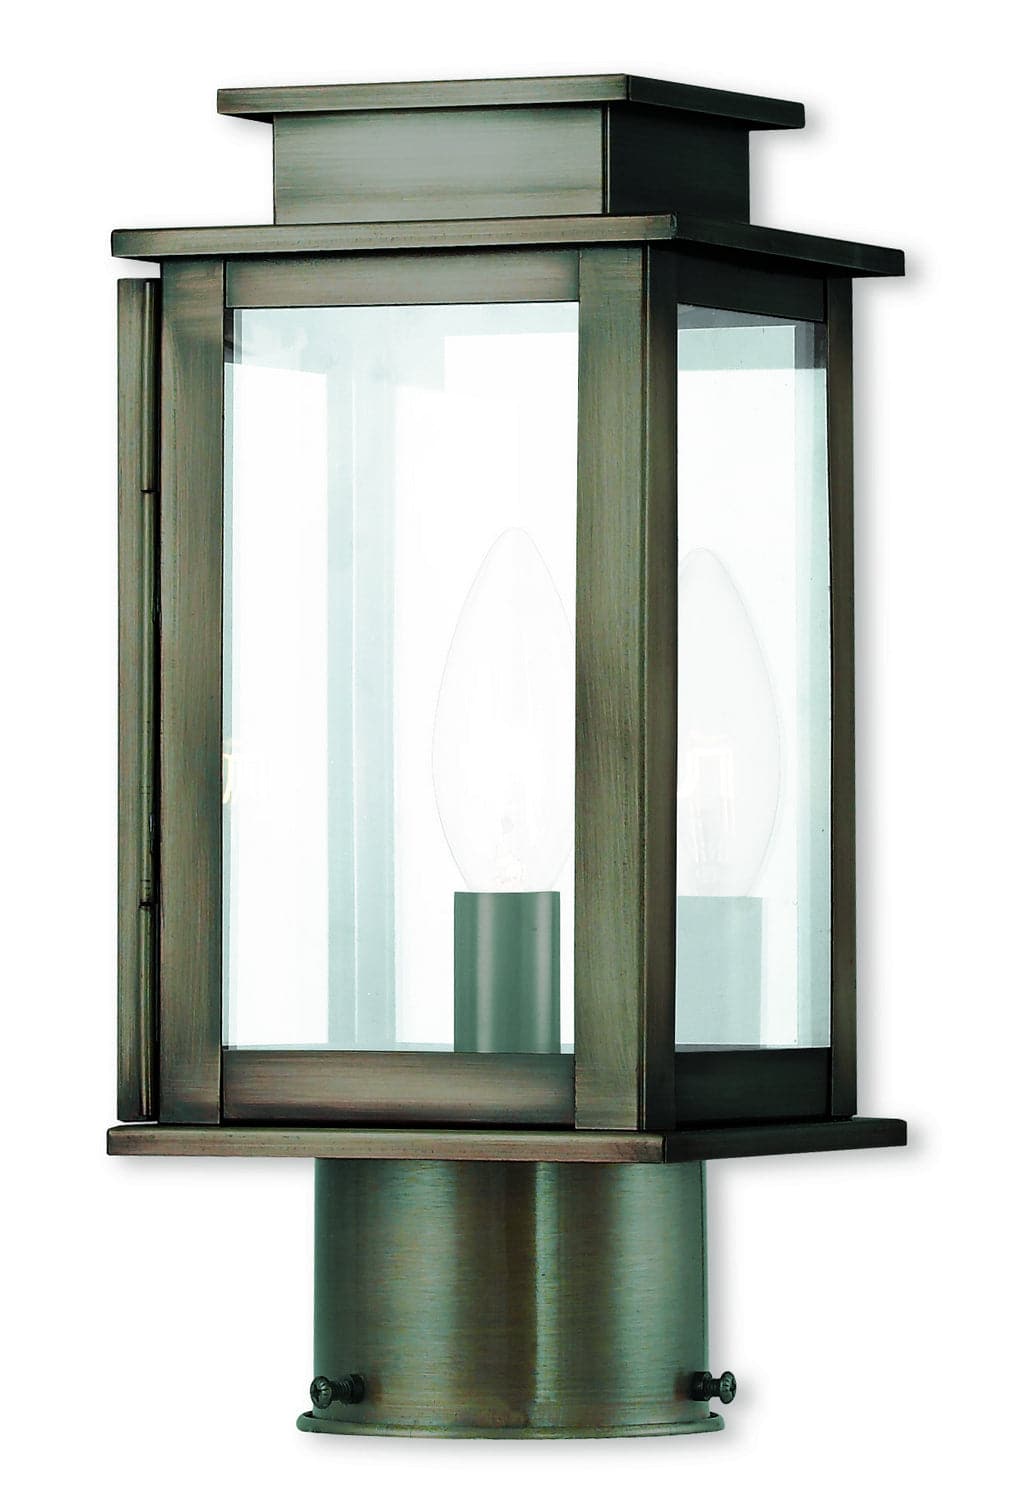 Livex Lighting - 20201-29 - One Light Outdoor Post-Top Lanterm - Princeton - Vintage Pewter w/ Polished Chrome Stainless Steel